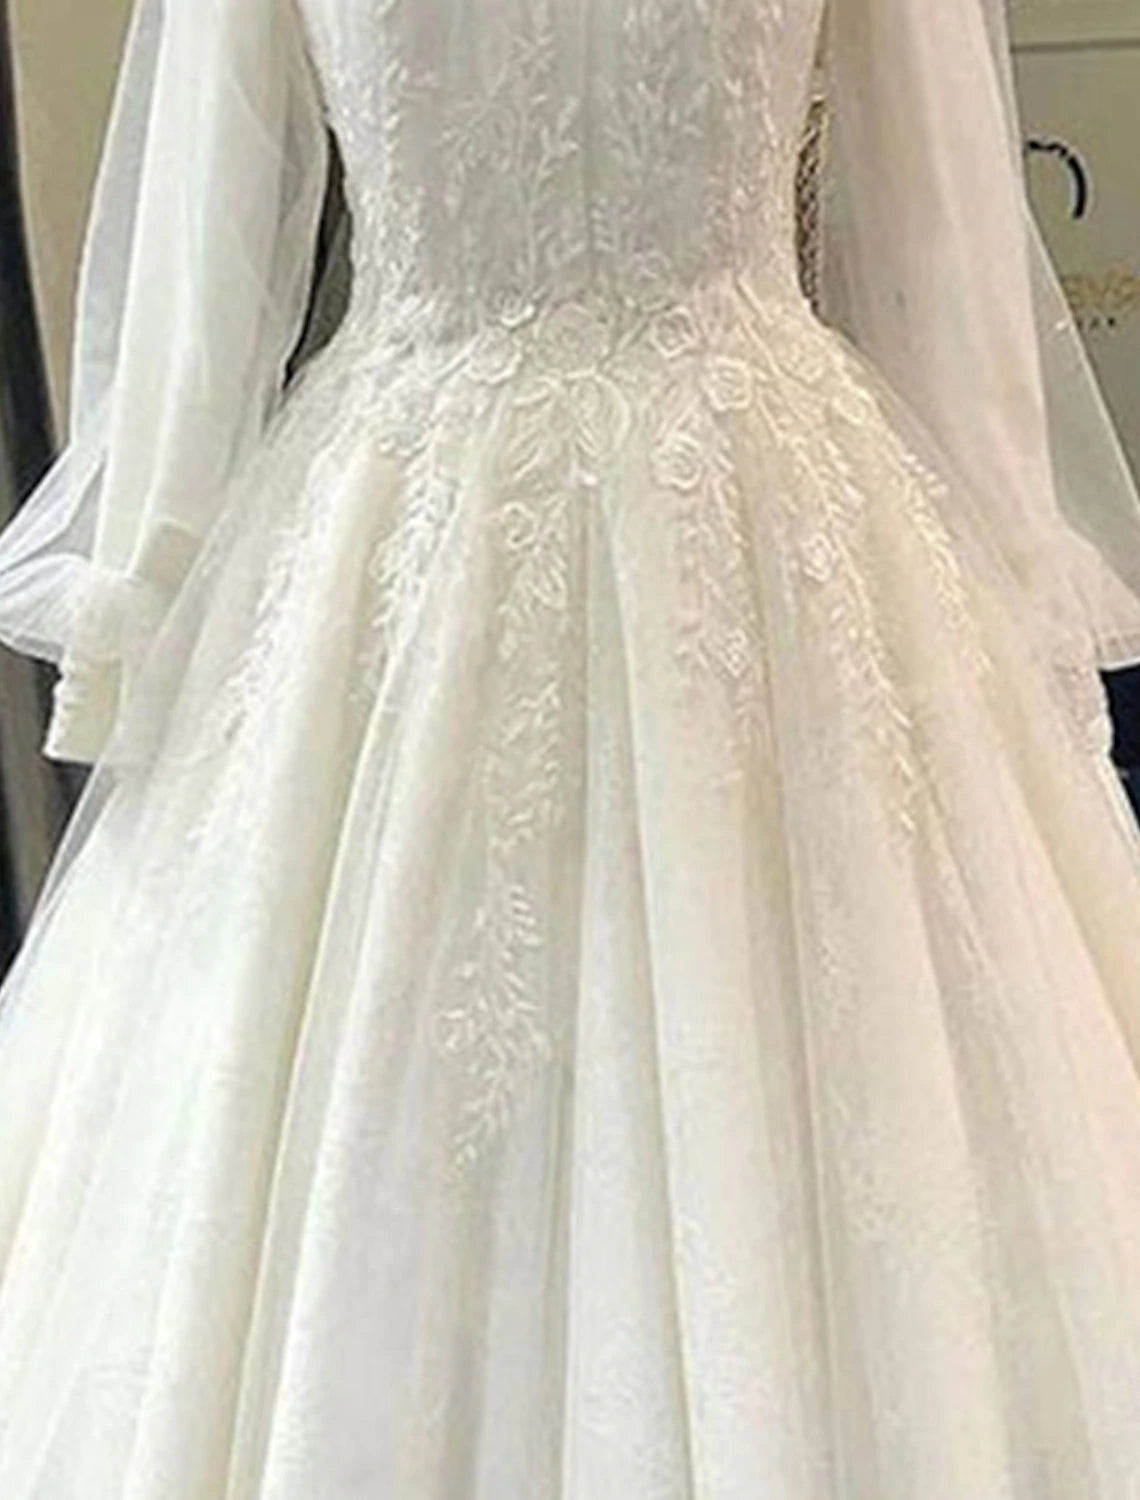 Engagement Vintage 1940s / 1950s Formal Wedding Dresses Ball Gown High Neck Long Sleeve Court Train Lace Bridal Gowns With Pleats Appliques